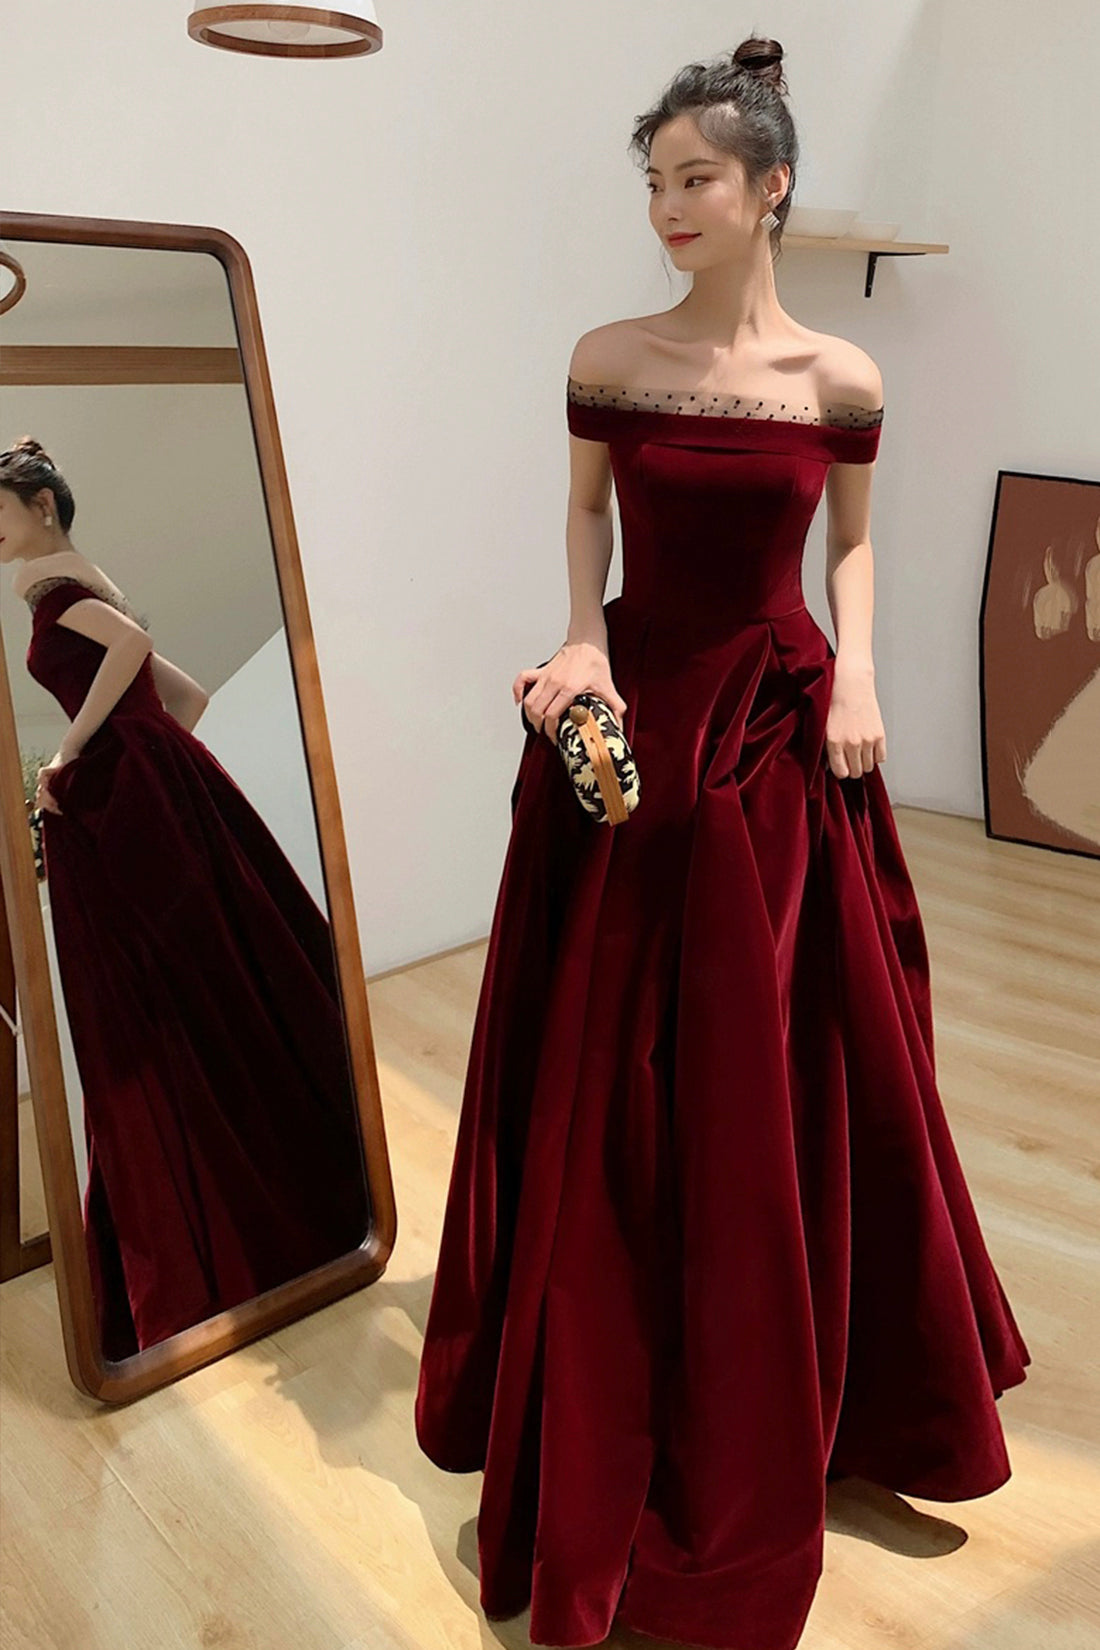 Yilis Flowy Prom Dresses Long Ball Gown Black Spaghetti Straps Satin A Line Formal  Dress Evening Gowns Size 0 at Amazon Women's Clothing store